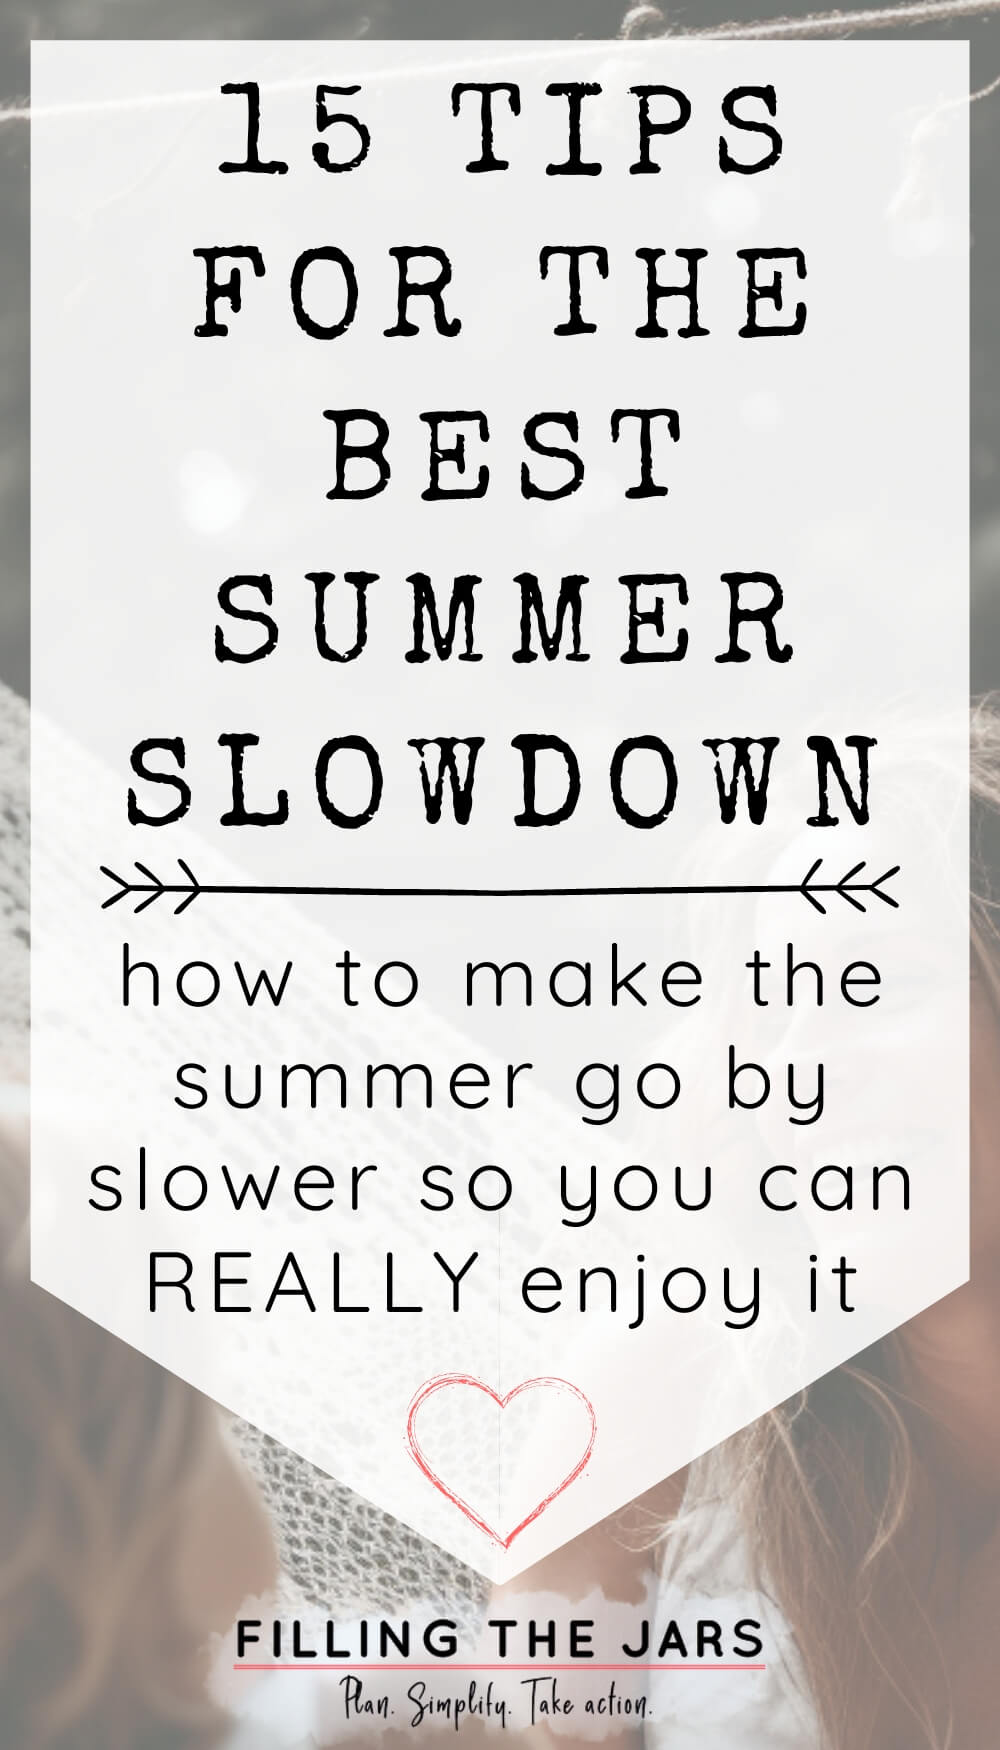 Text 15 tips for the best summer slowdown how to make the summer go by slower so you can really enjoy it on white background.